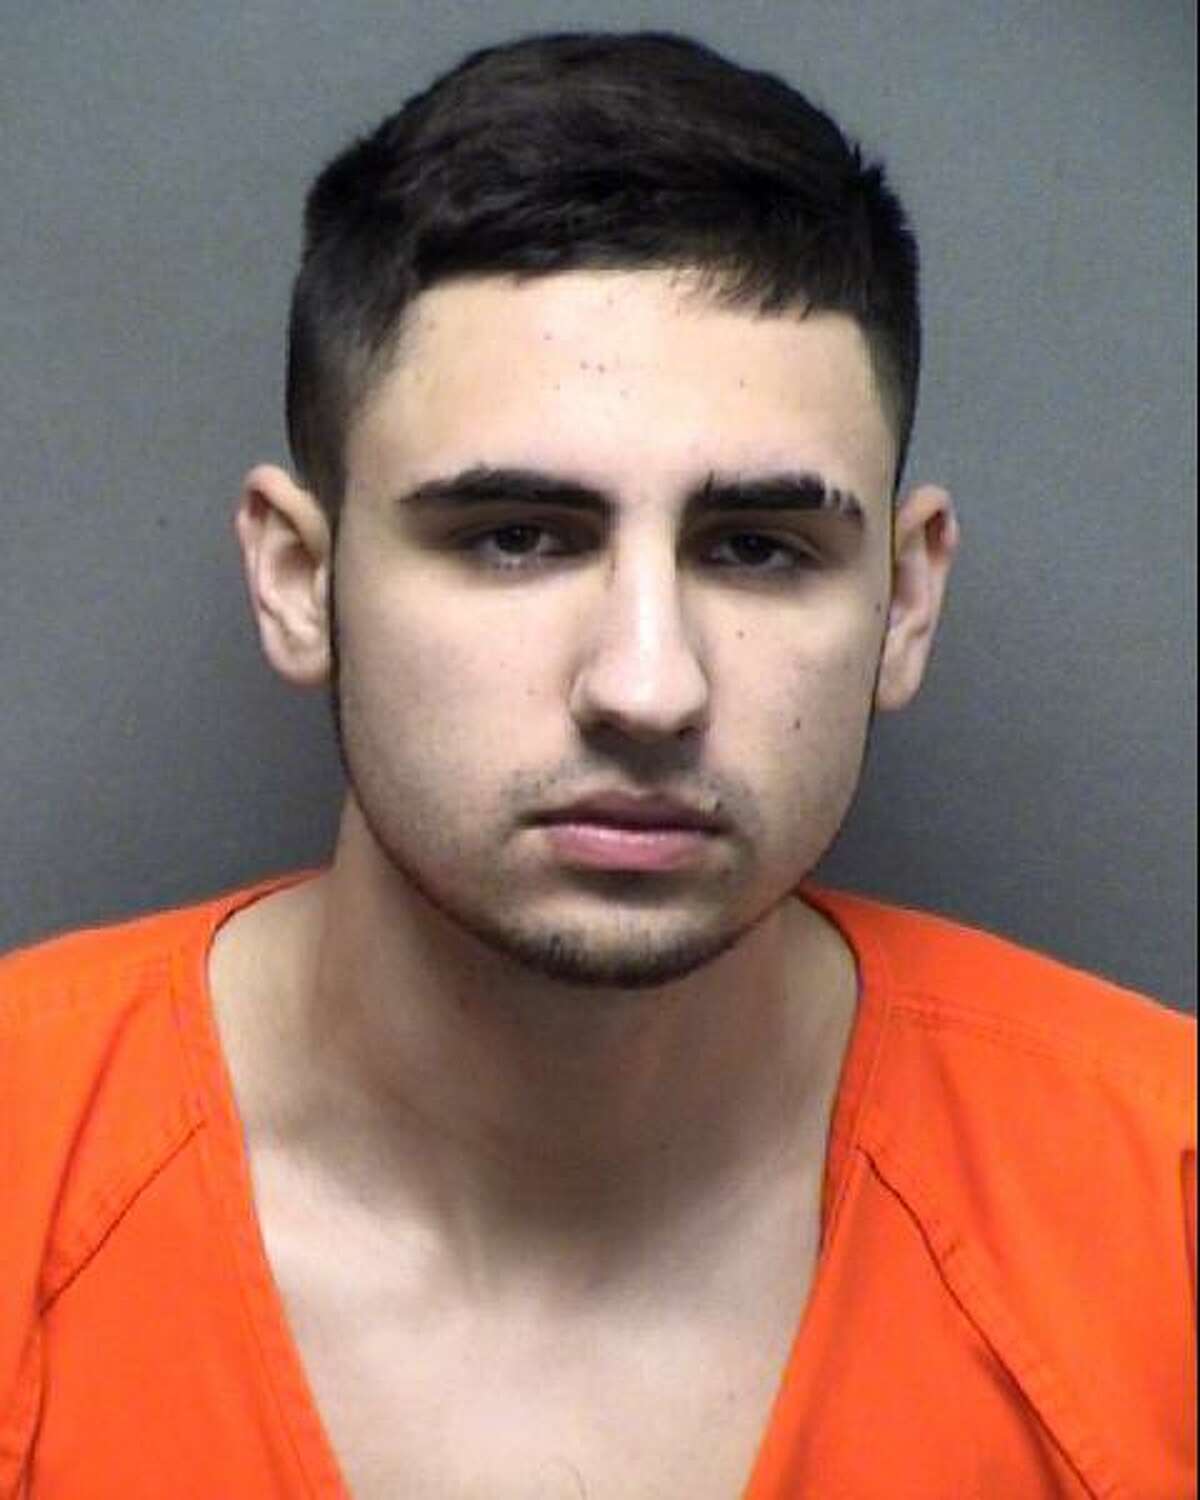 Salim Hartshorn, 22, was arrested on charges of sexual assault on a child and harboring a runaway child.